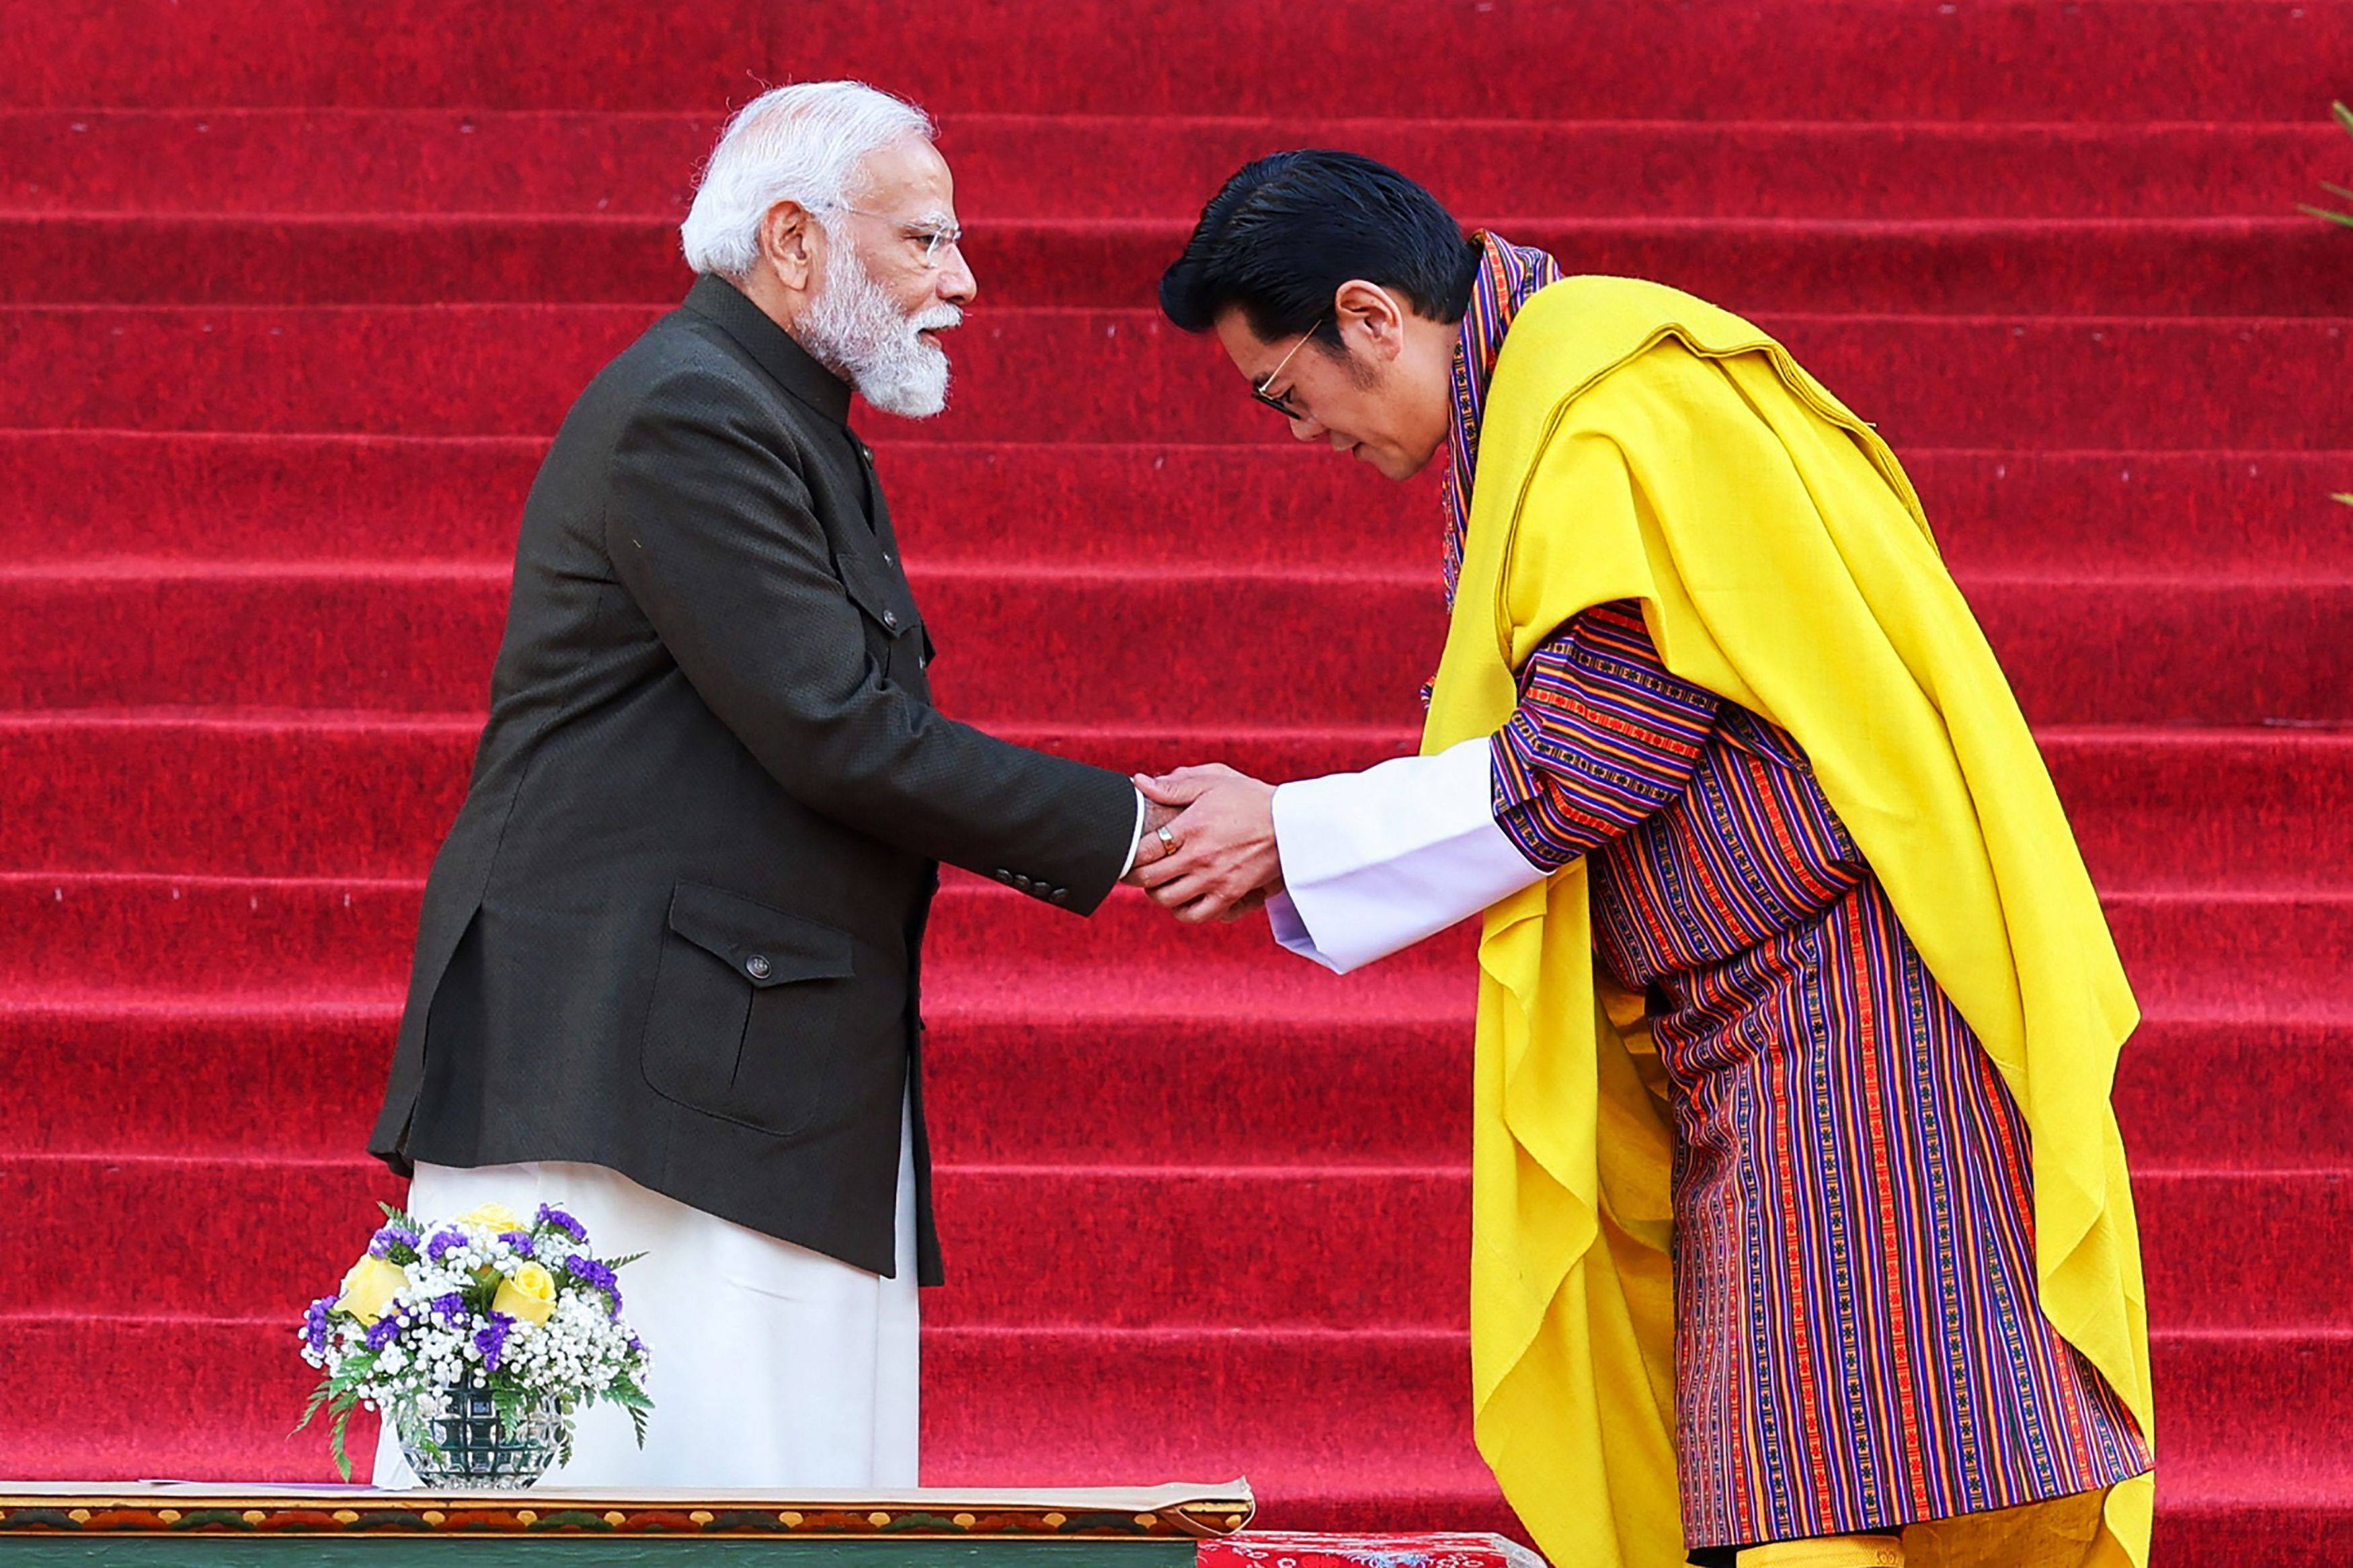 India’s Prime Minister Narendra Modi and Bhutan’s King Jigme Khesar Namgyel Wangchuck greet each other during the conferment ceremony of the Order of the Druk Gyalpo award to Modi in Bhutan’s capital Thimpu on March 22. Photo: AFP